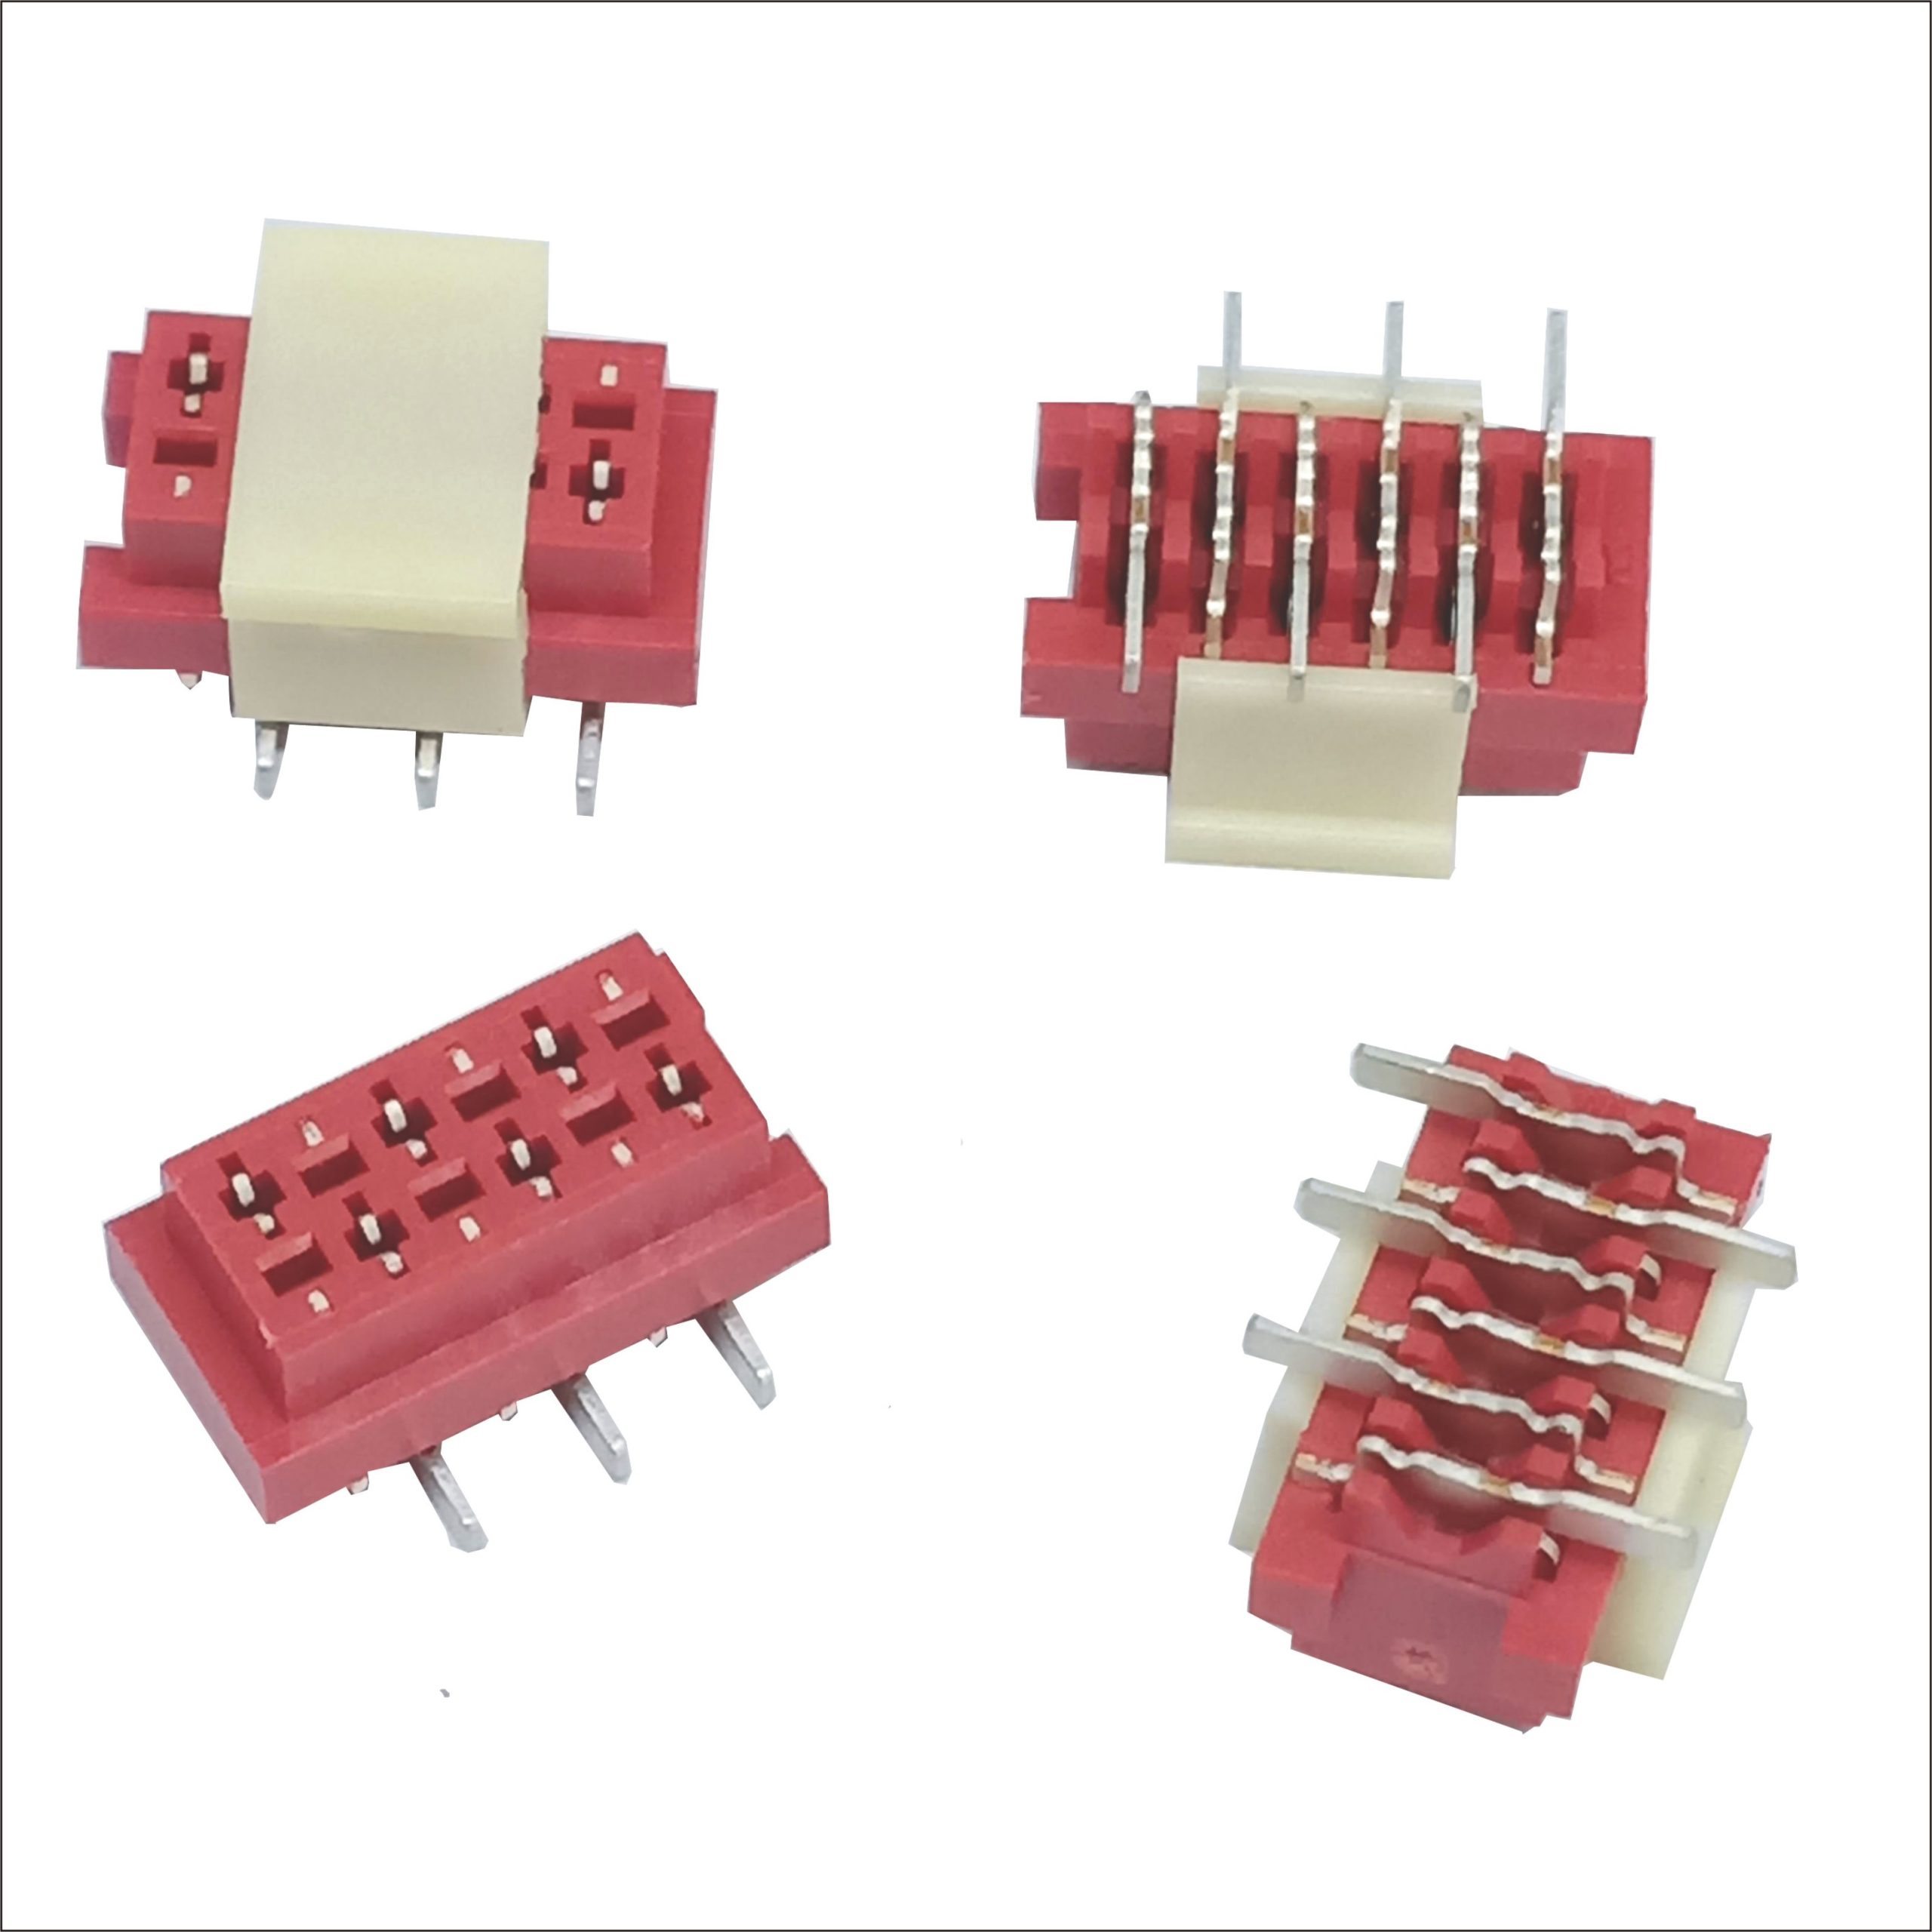 Micro-Match 7-188275-6: Optimize Connectivity with 6-Position .05in (1.27mm) Vertical Surface Mount Receptacle.